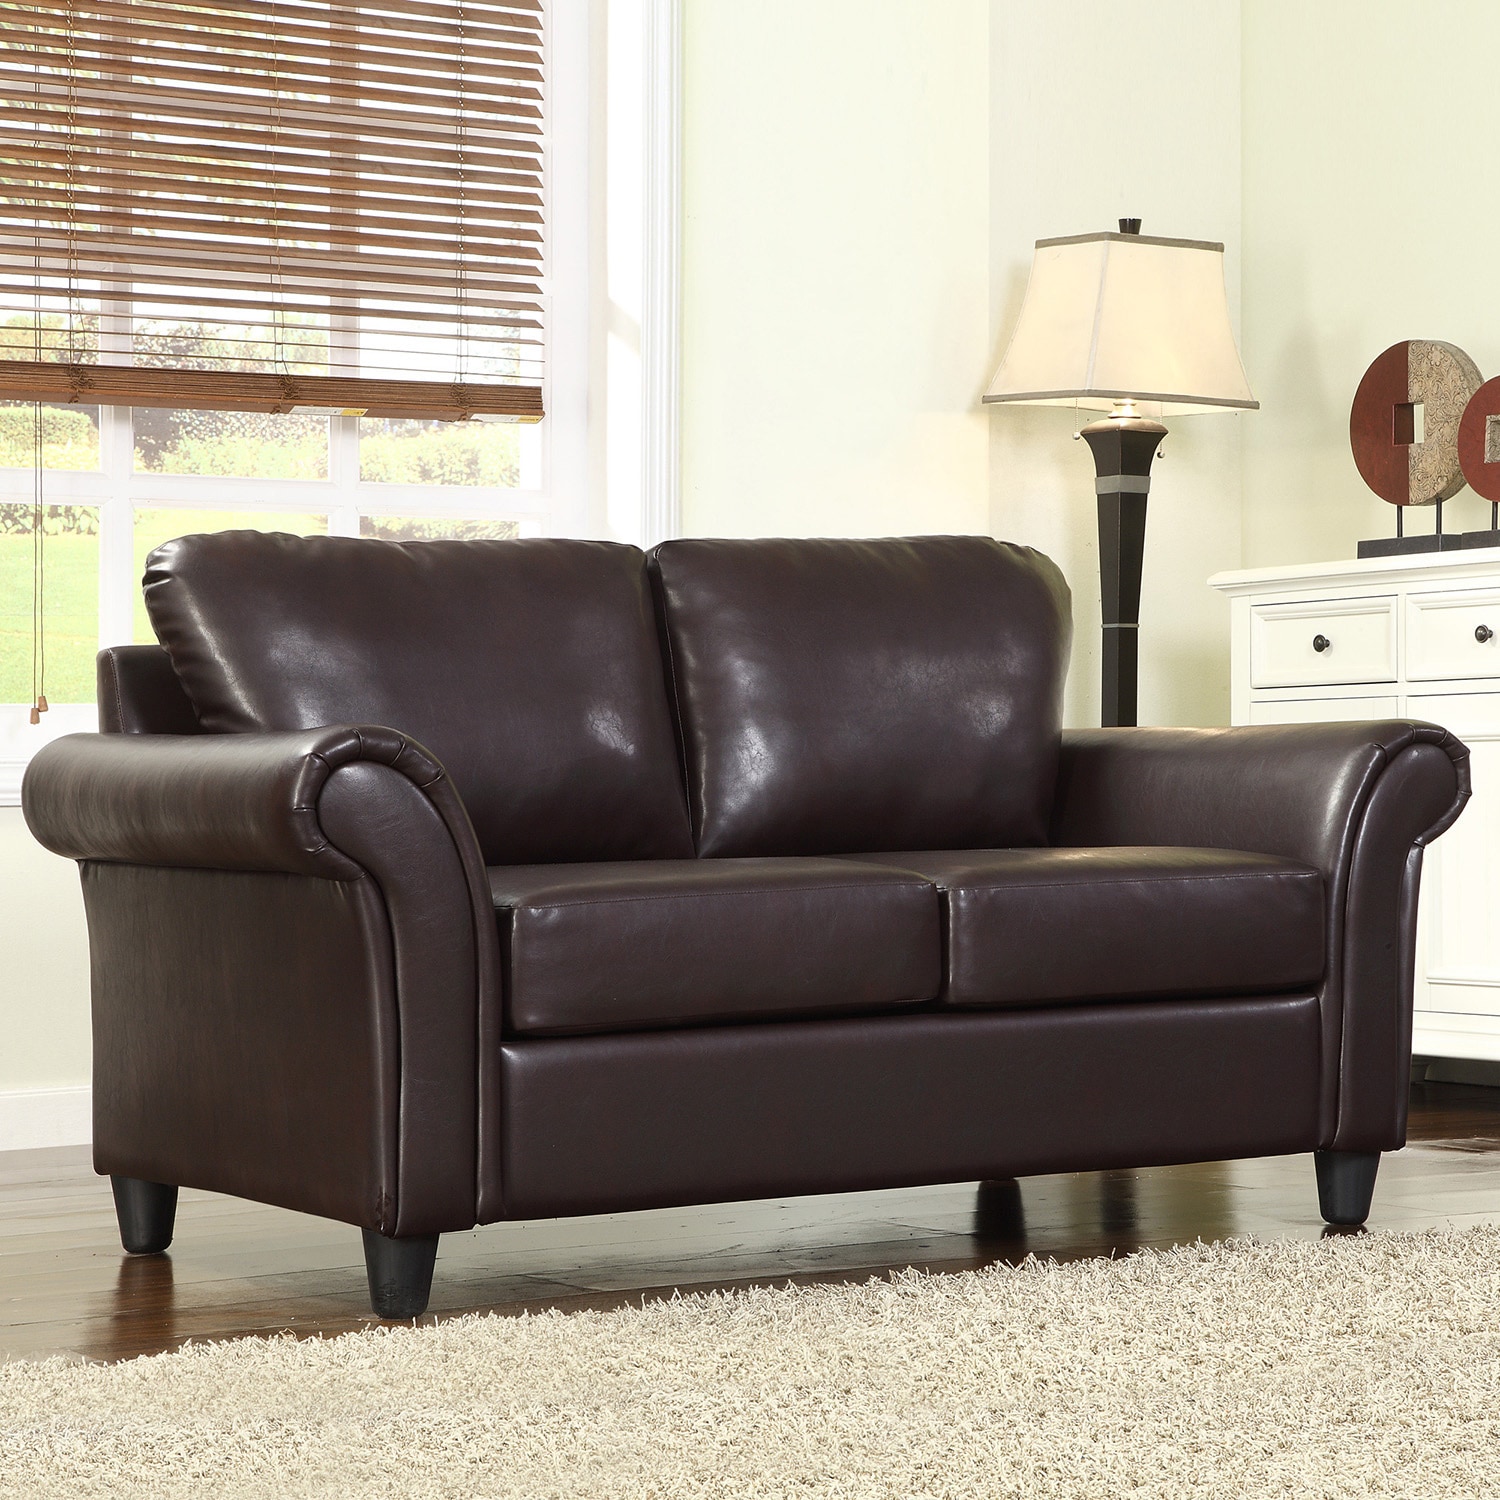 Tribecca Home Petrie Dark Brown Faux Leather Rolled Arm Loveseat